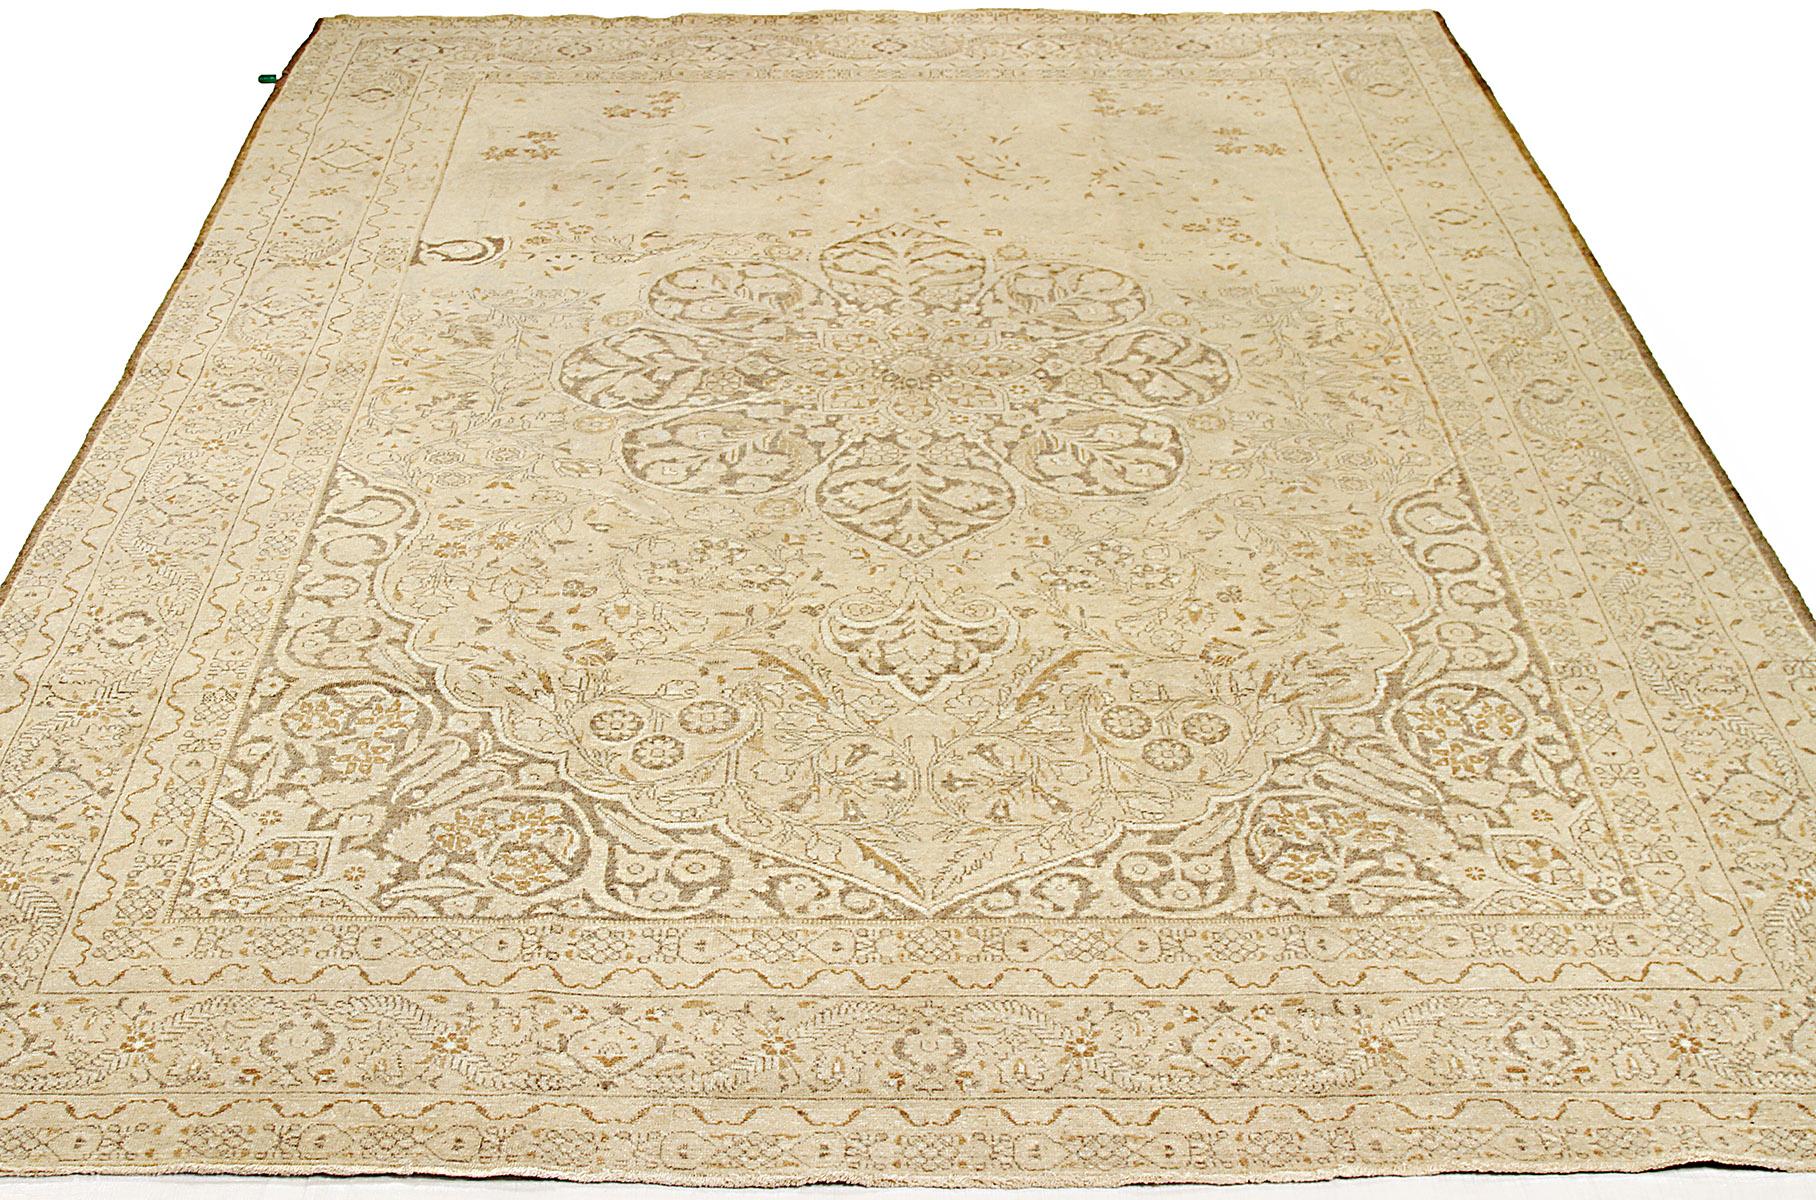 Antique Persian rug handwoven from the finest sheep’s wool and colored with all-natural vegetable dyes that are safe for humans and pets. It’s a traditional Tabriz weaving featuring a lovely ensemble of floral designs in black and brown over an